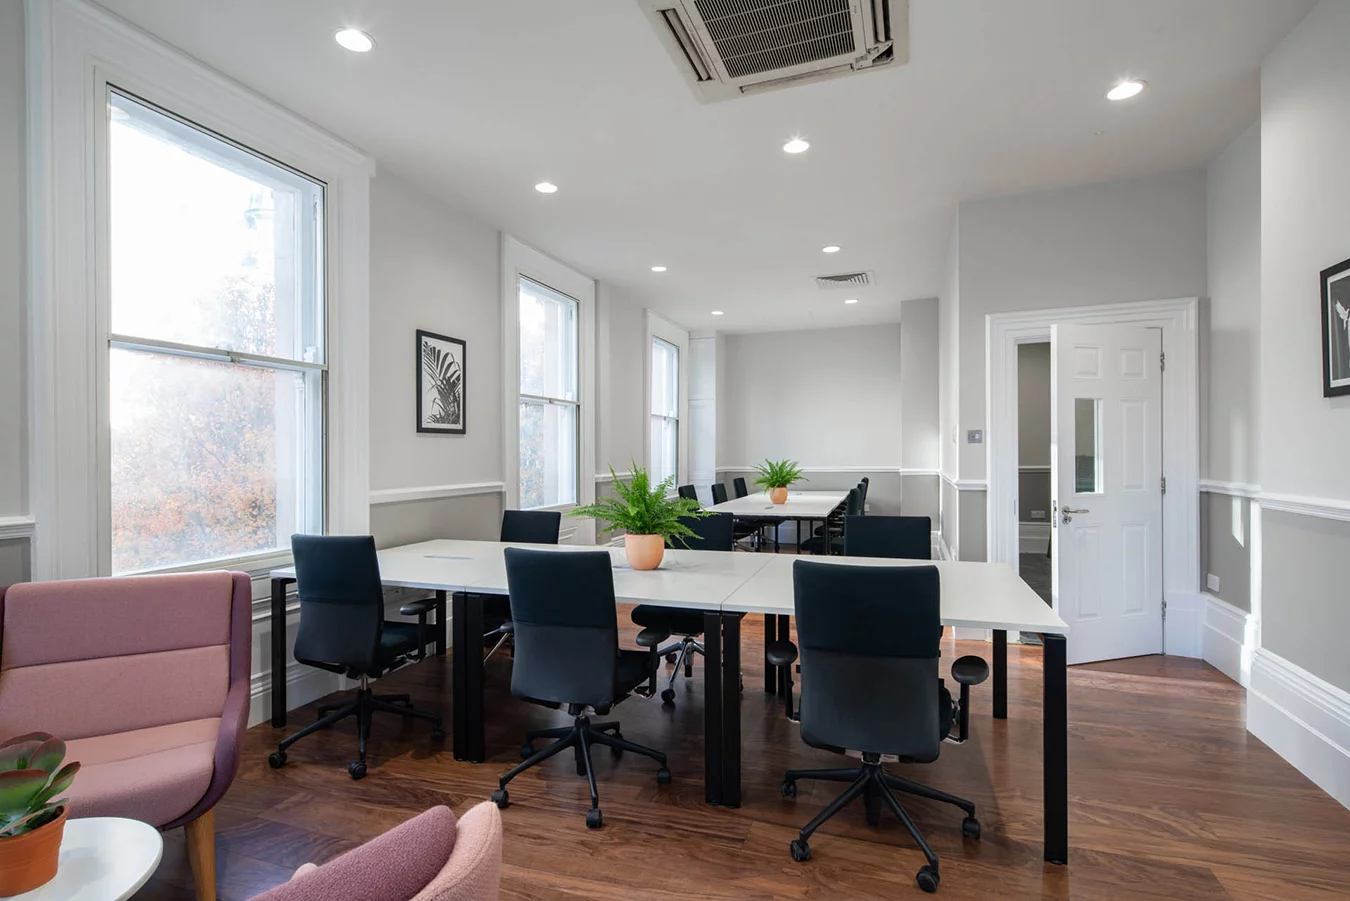 Offices for rent in Mayfair